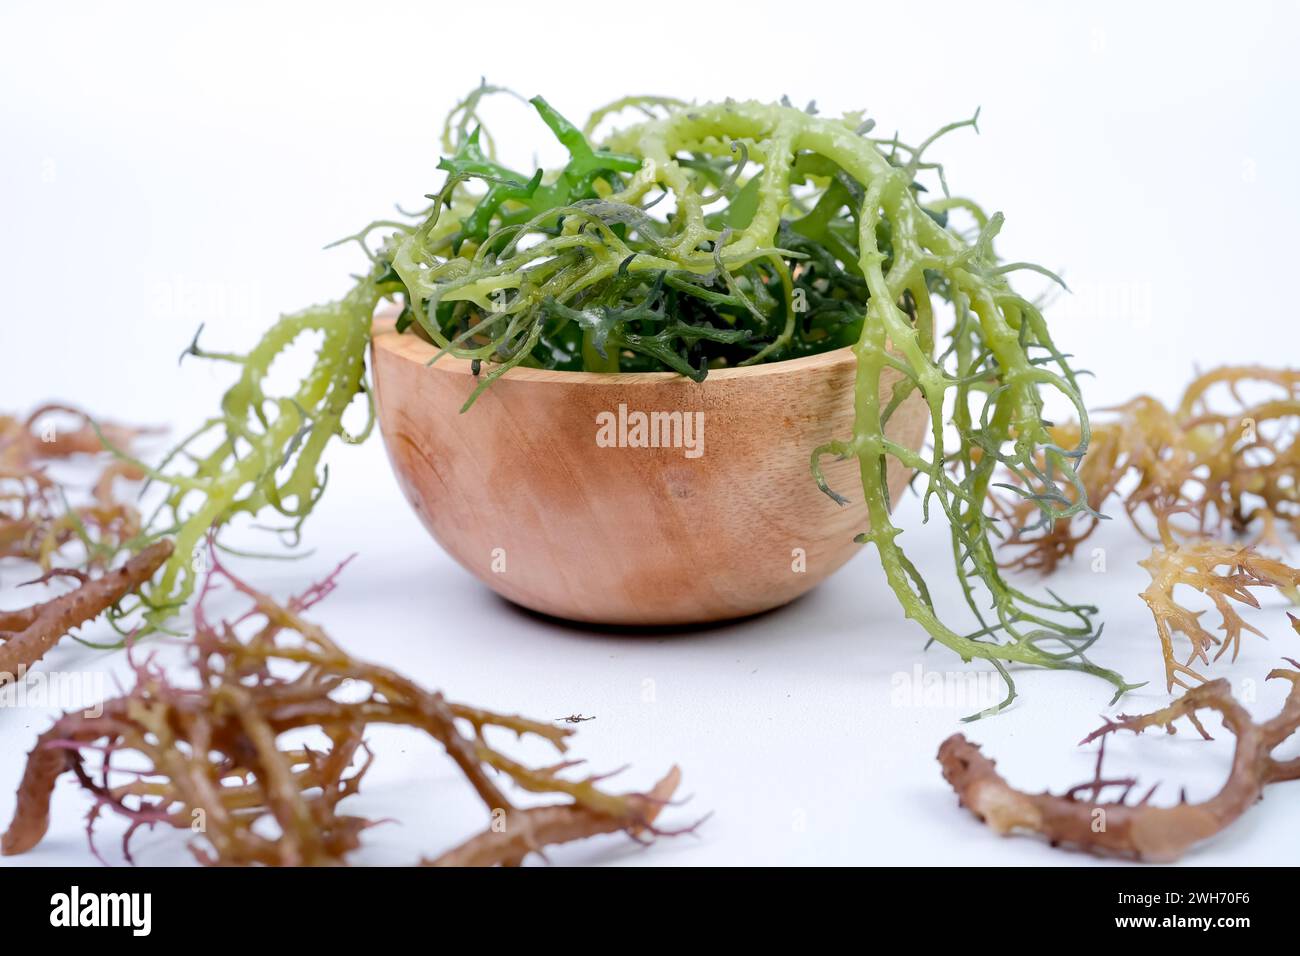 Fresh Graciillaria Spp seaweed in wooden bowl isolated on white background Stock Photo